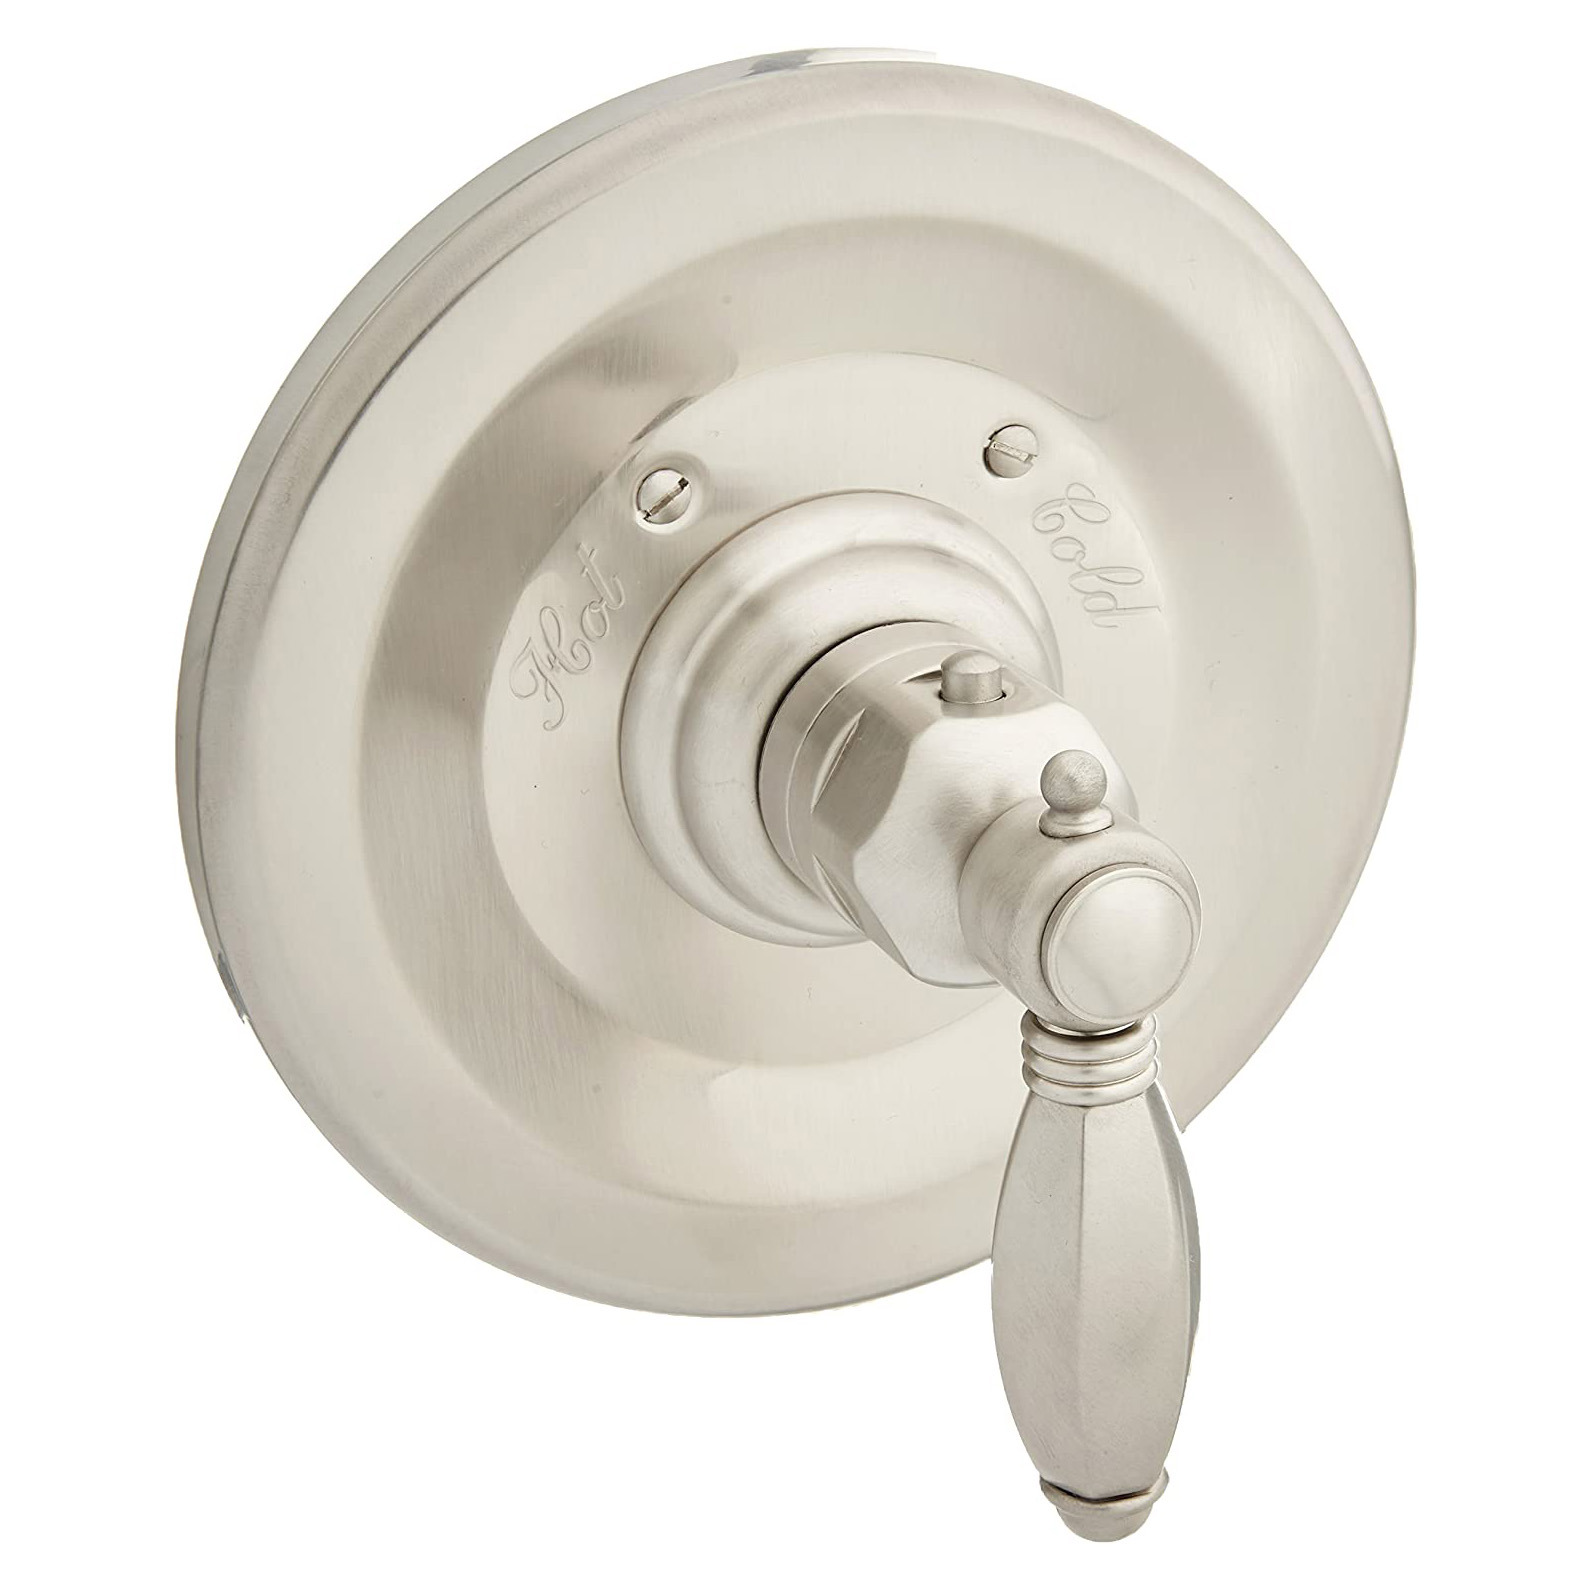 Country Bath Thermo Trim Plate In Satin Nickel